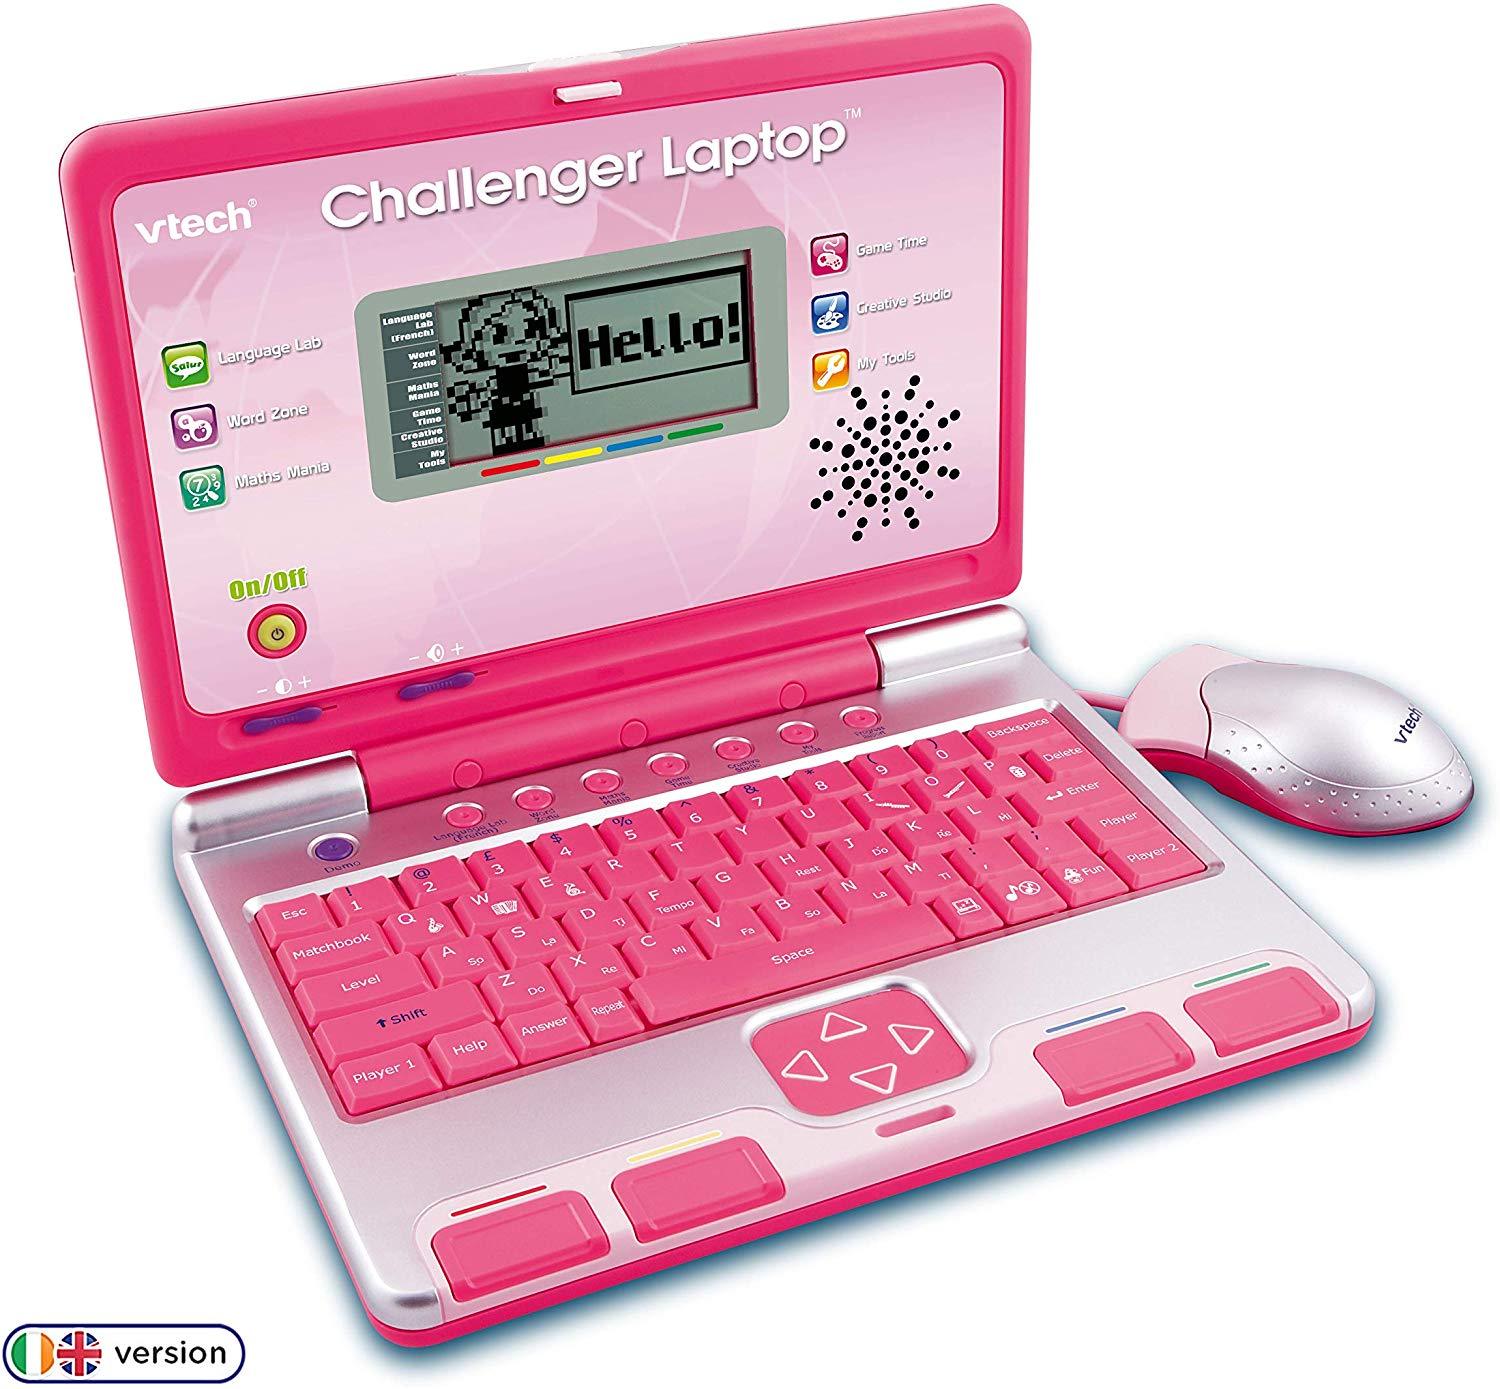 VTech Challenger Laptop Pink Anne Claire Baby Store 